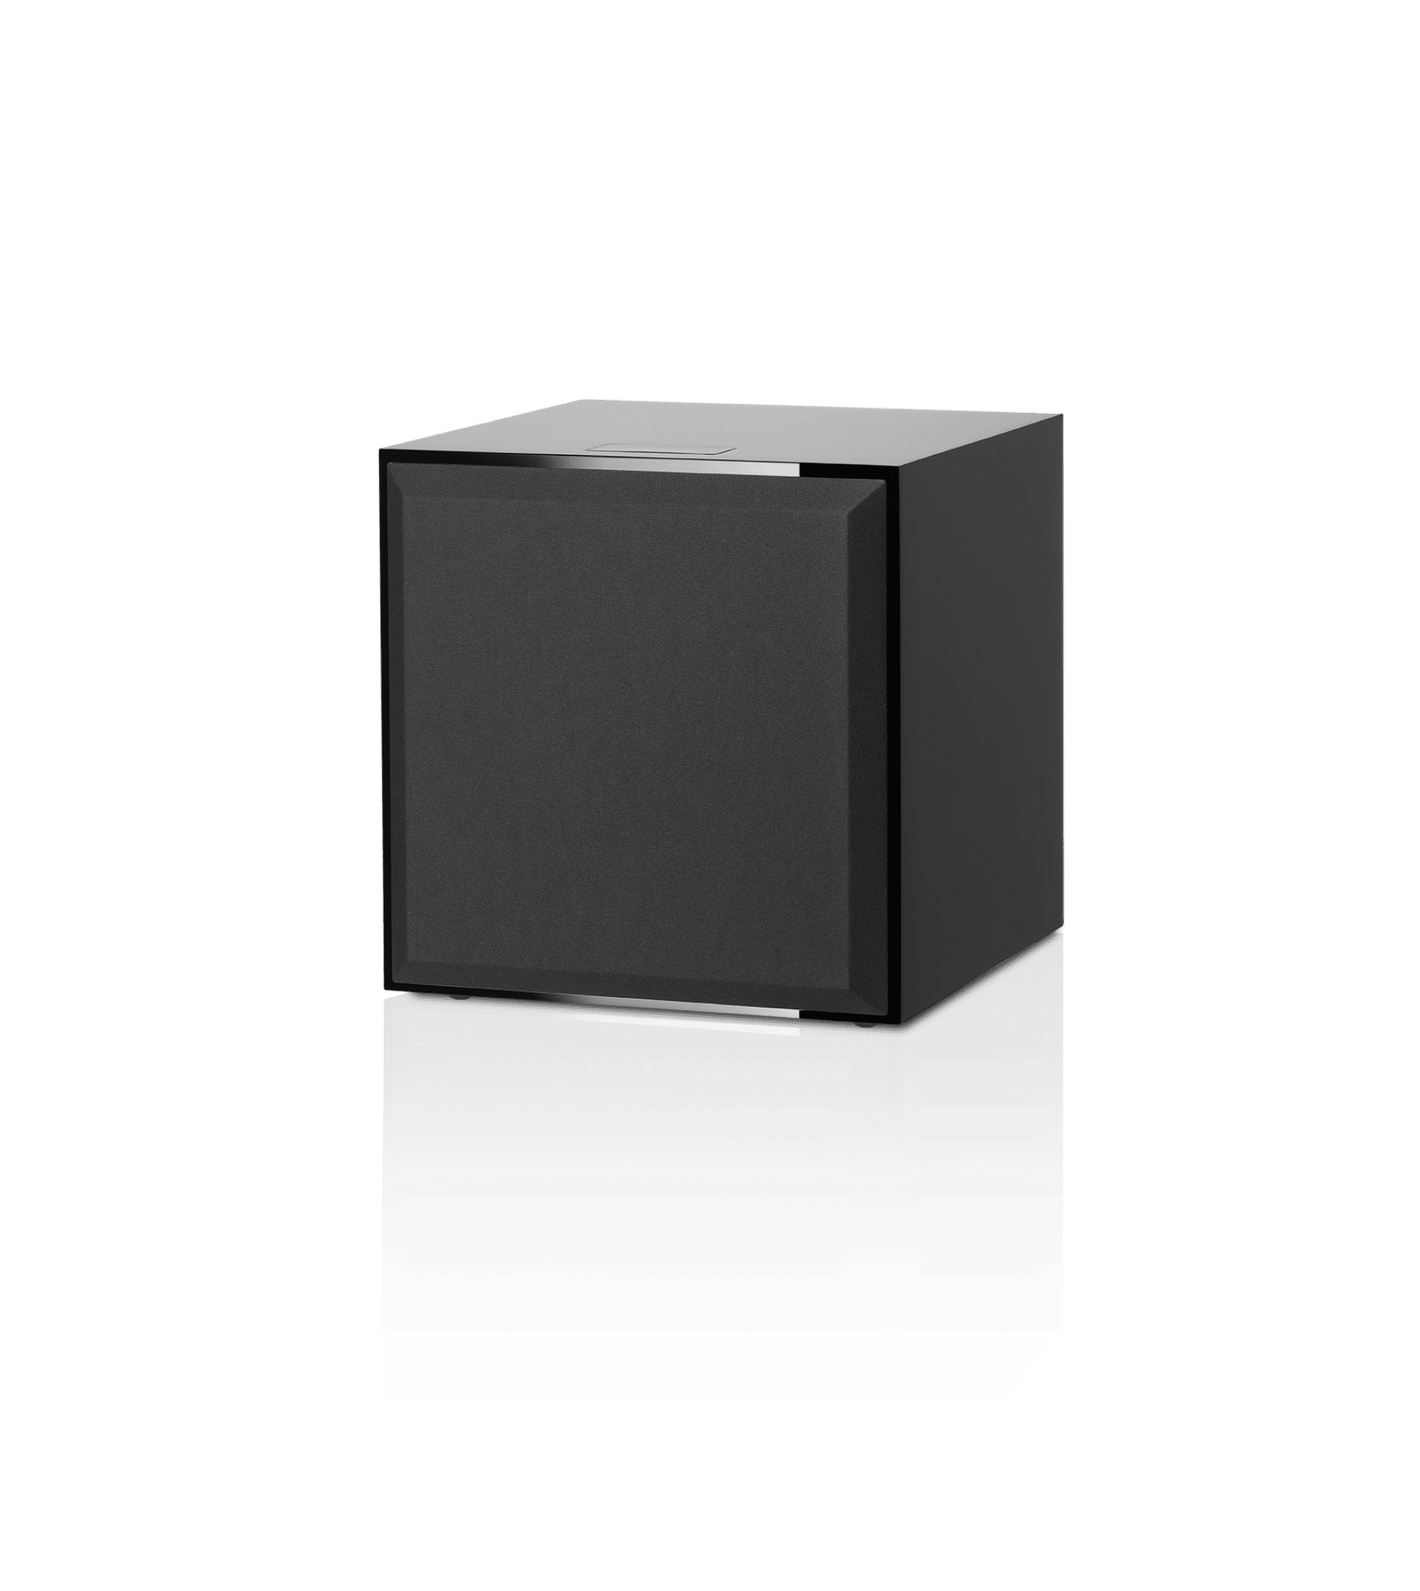 Bowers & Wilkins DB 4S Powered Subwoofer